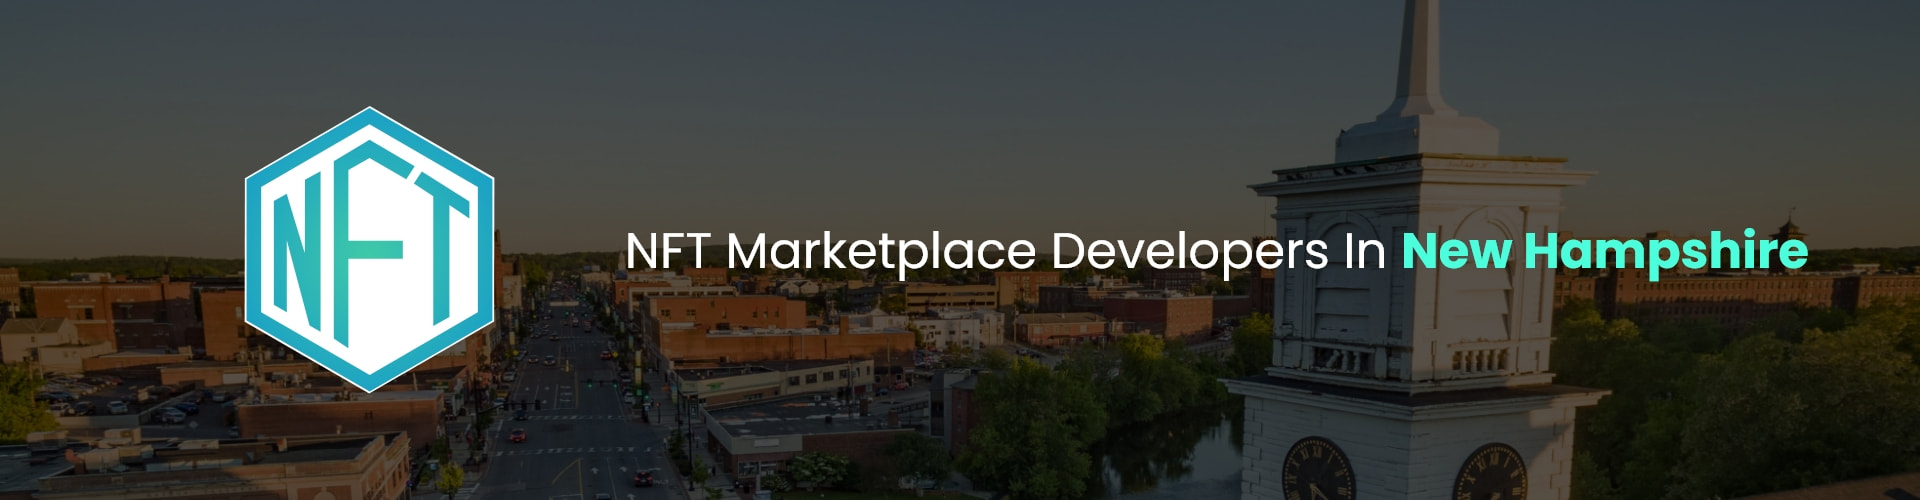 hire nft marketplace developers in new hampshire